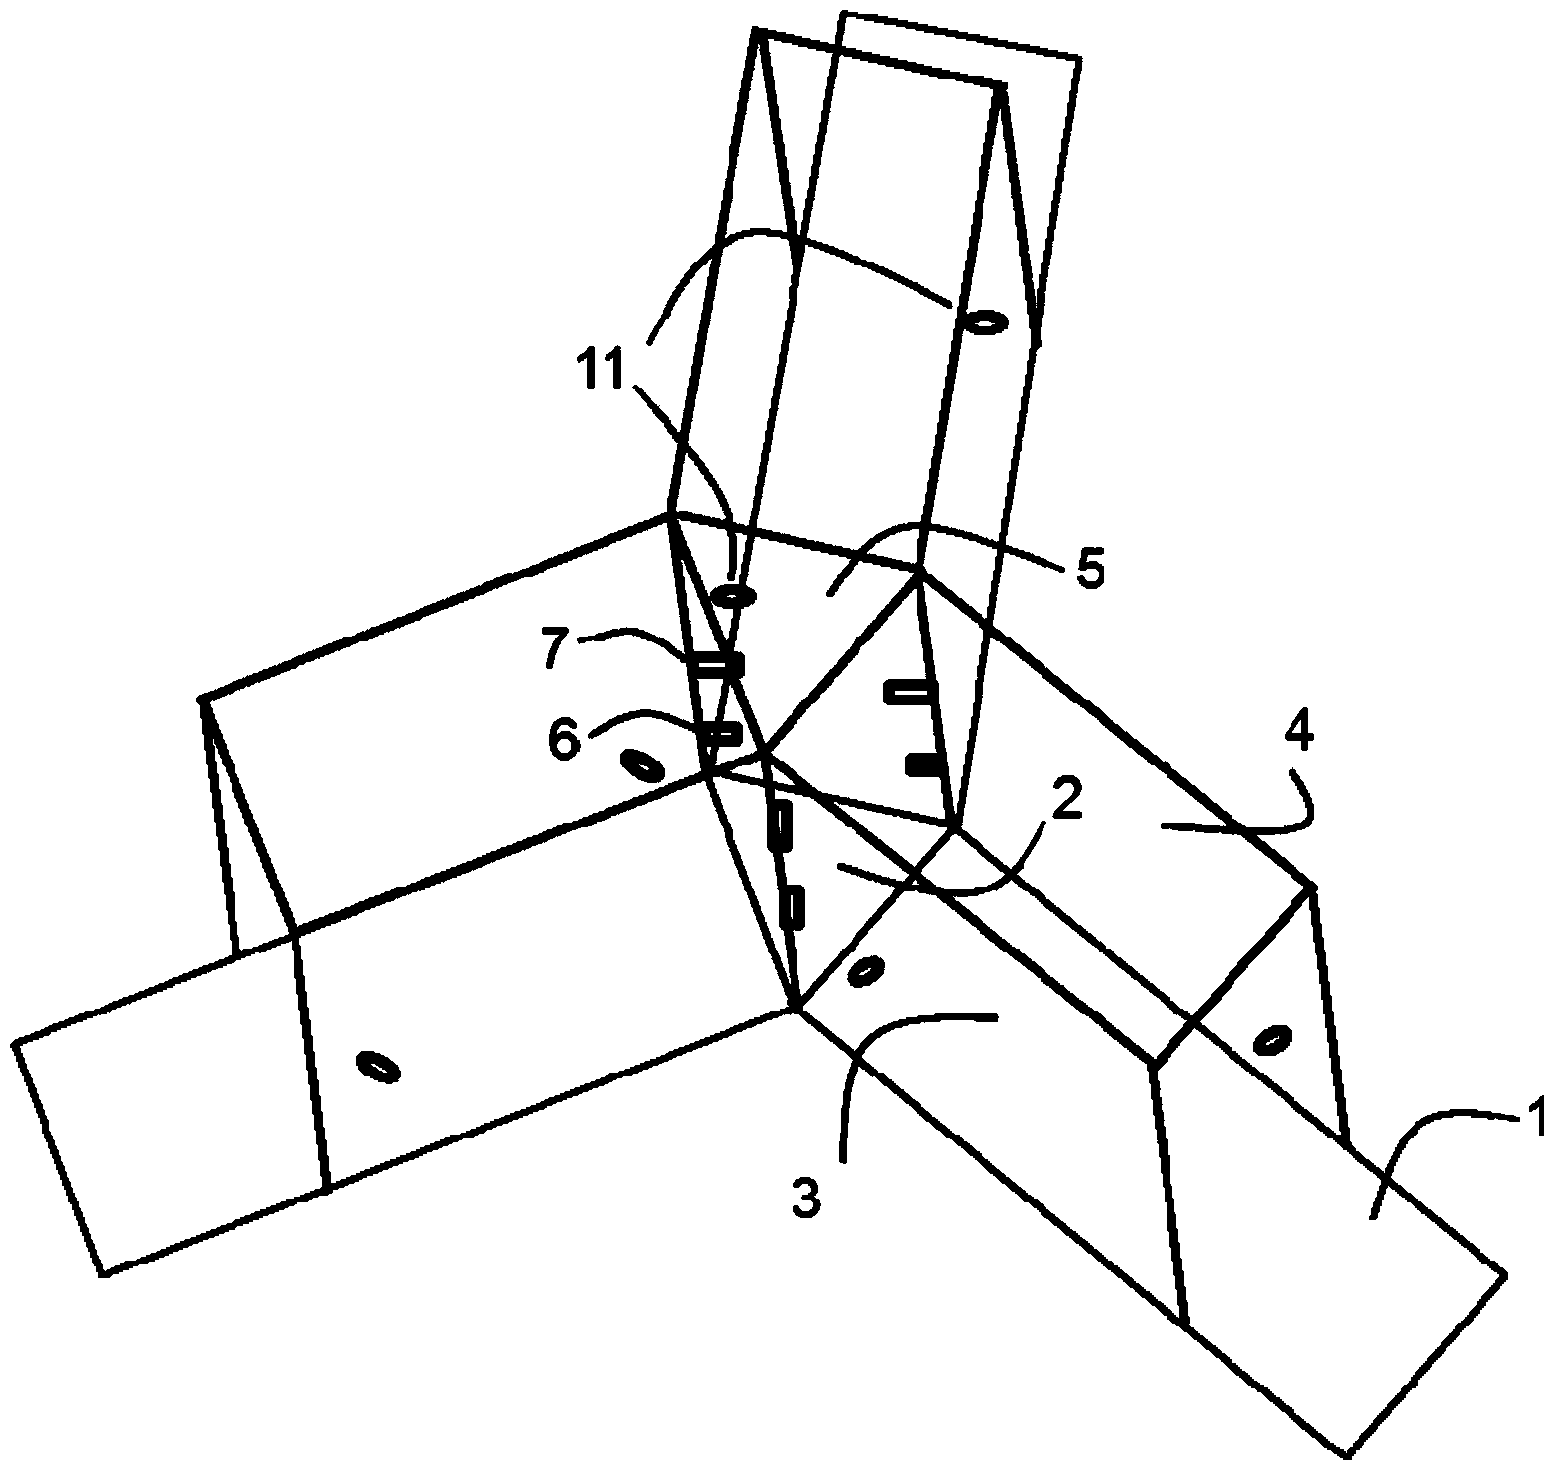 Three-arm maze device oriented to animal robot control training, and training method